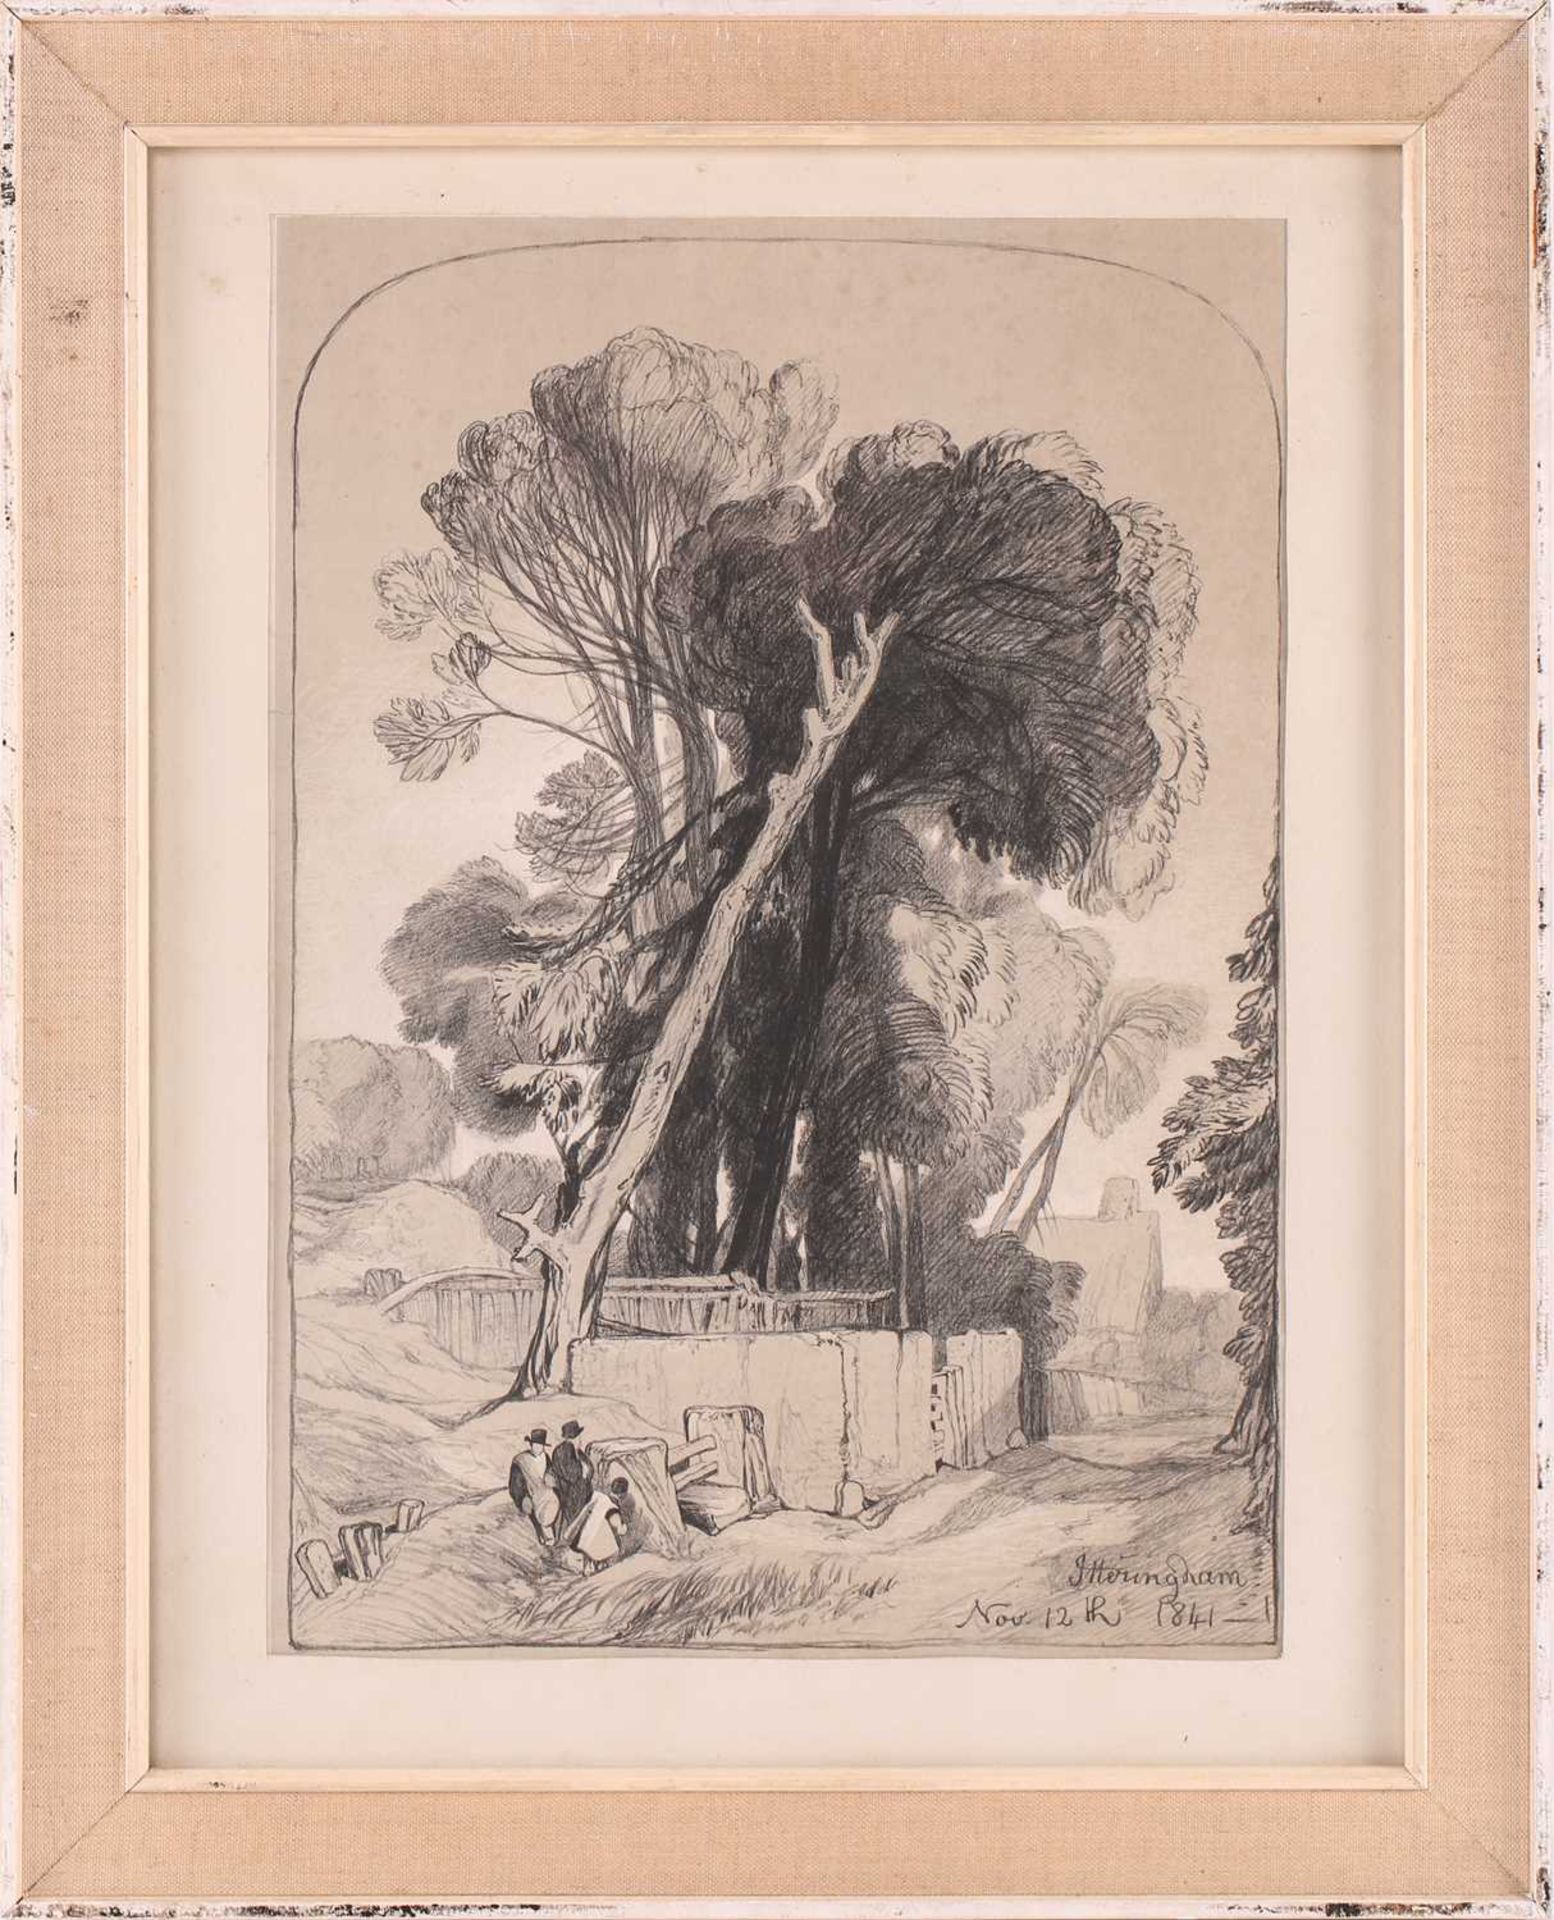 Miles Edmund Cotman (1810 - 1858), 'Itteringham', lithograph, dated in the image Nov 12th, 1841,